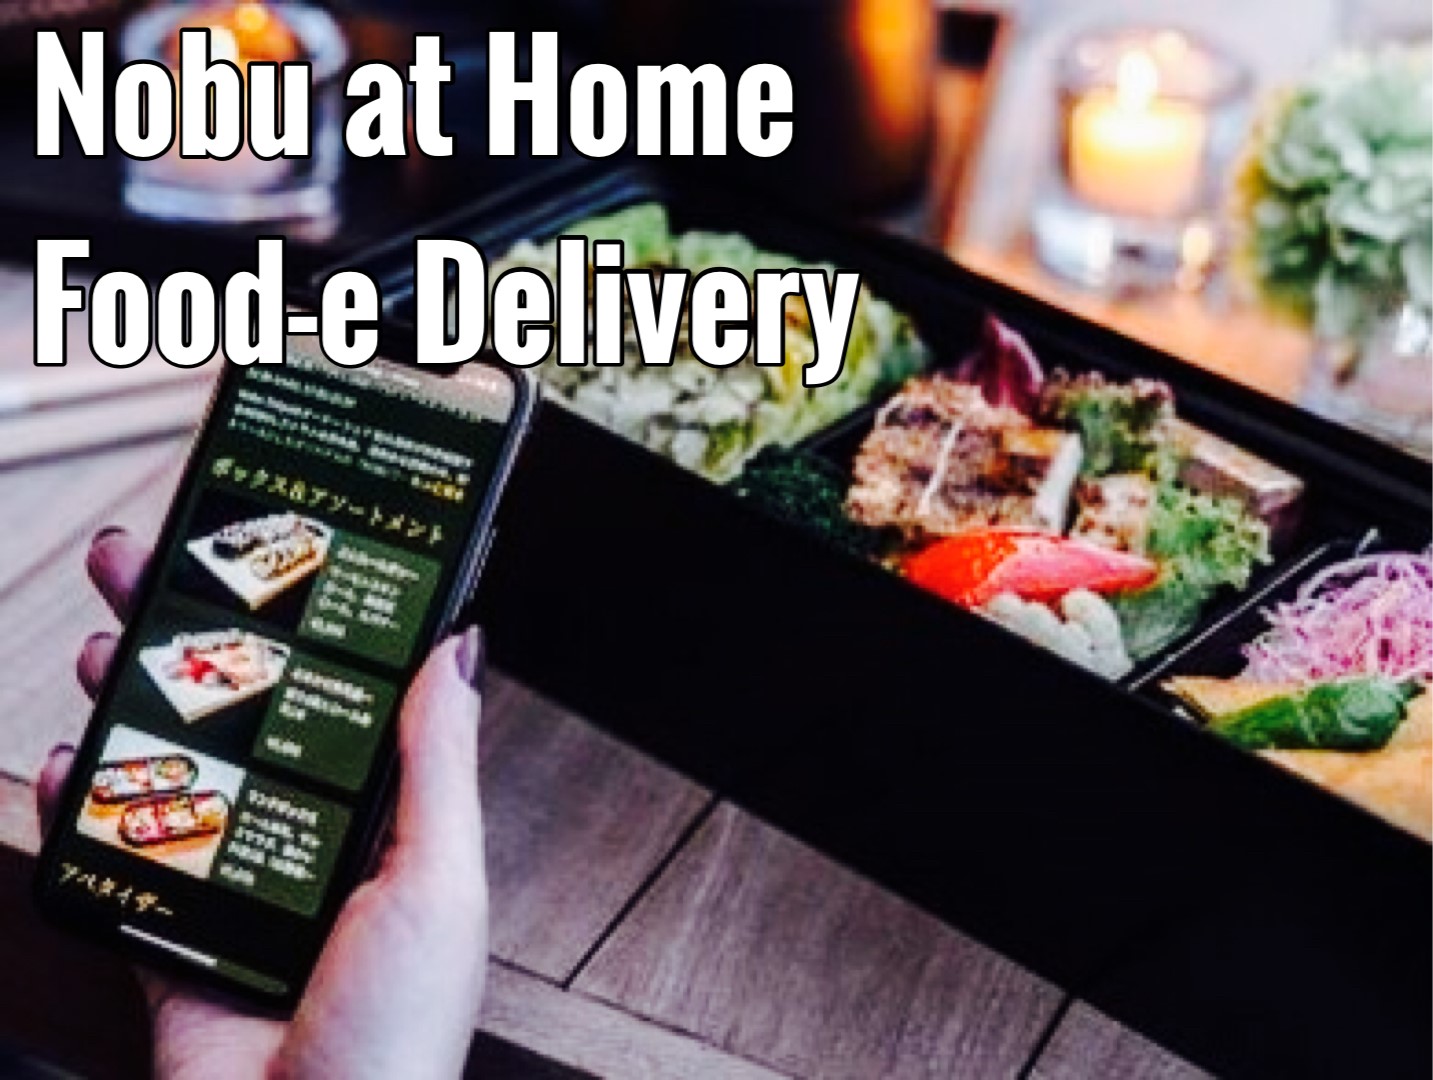       "Nobu at Home"   DELIVERY by Food-E   Enjoy our extensive take-out menu  delivered to your home via Food-E!    Food-E     &nbsp;    &nbsp;    &nbsp;  